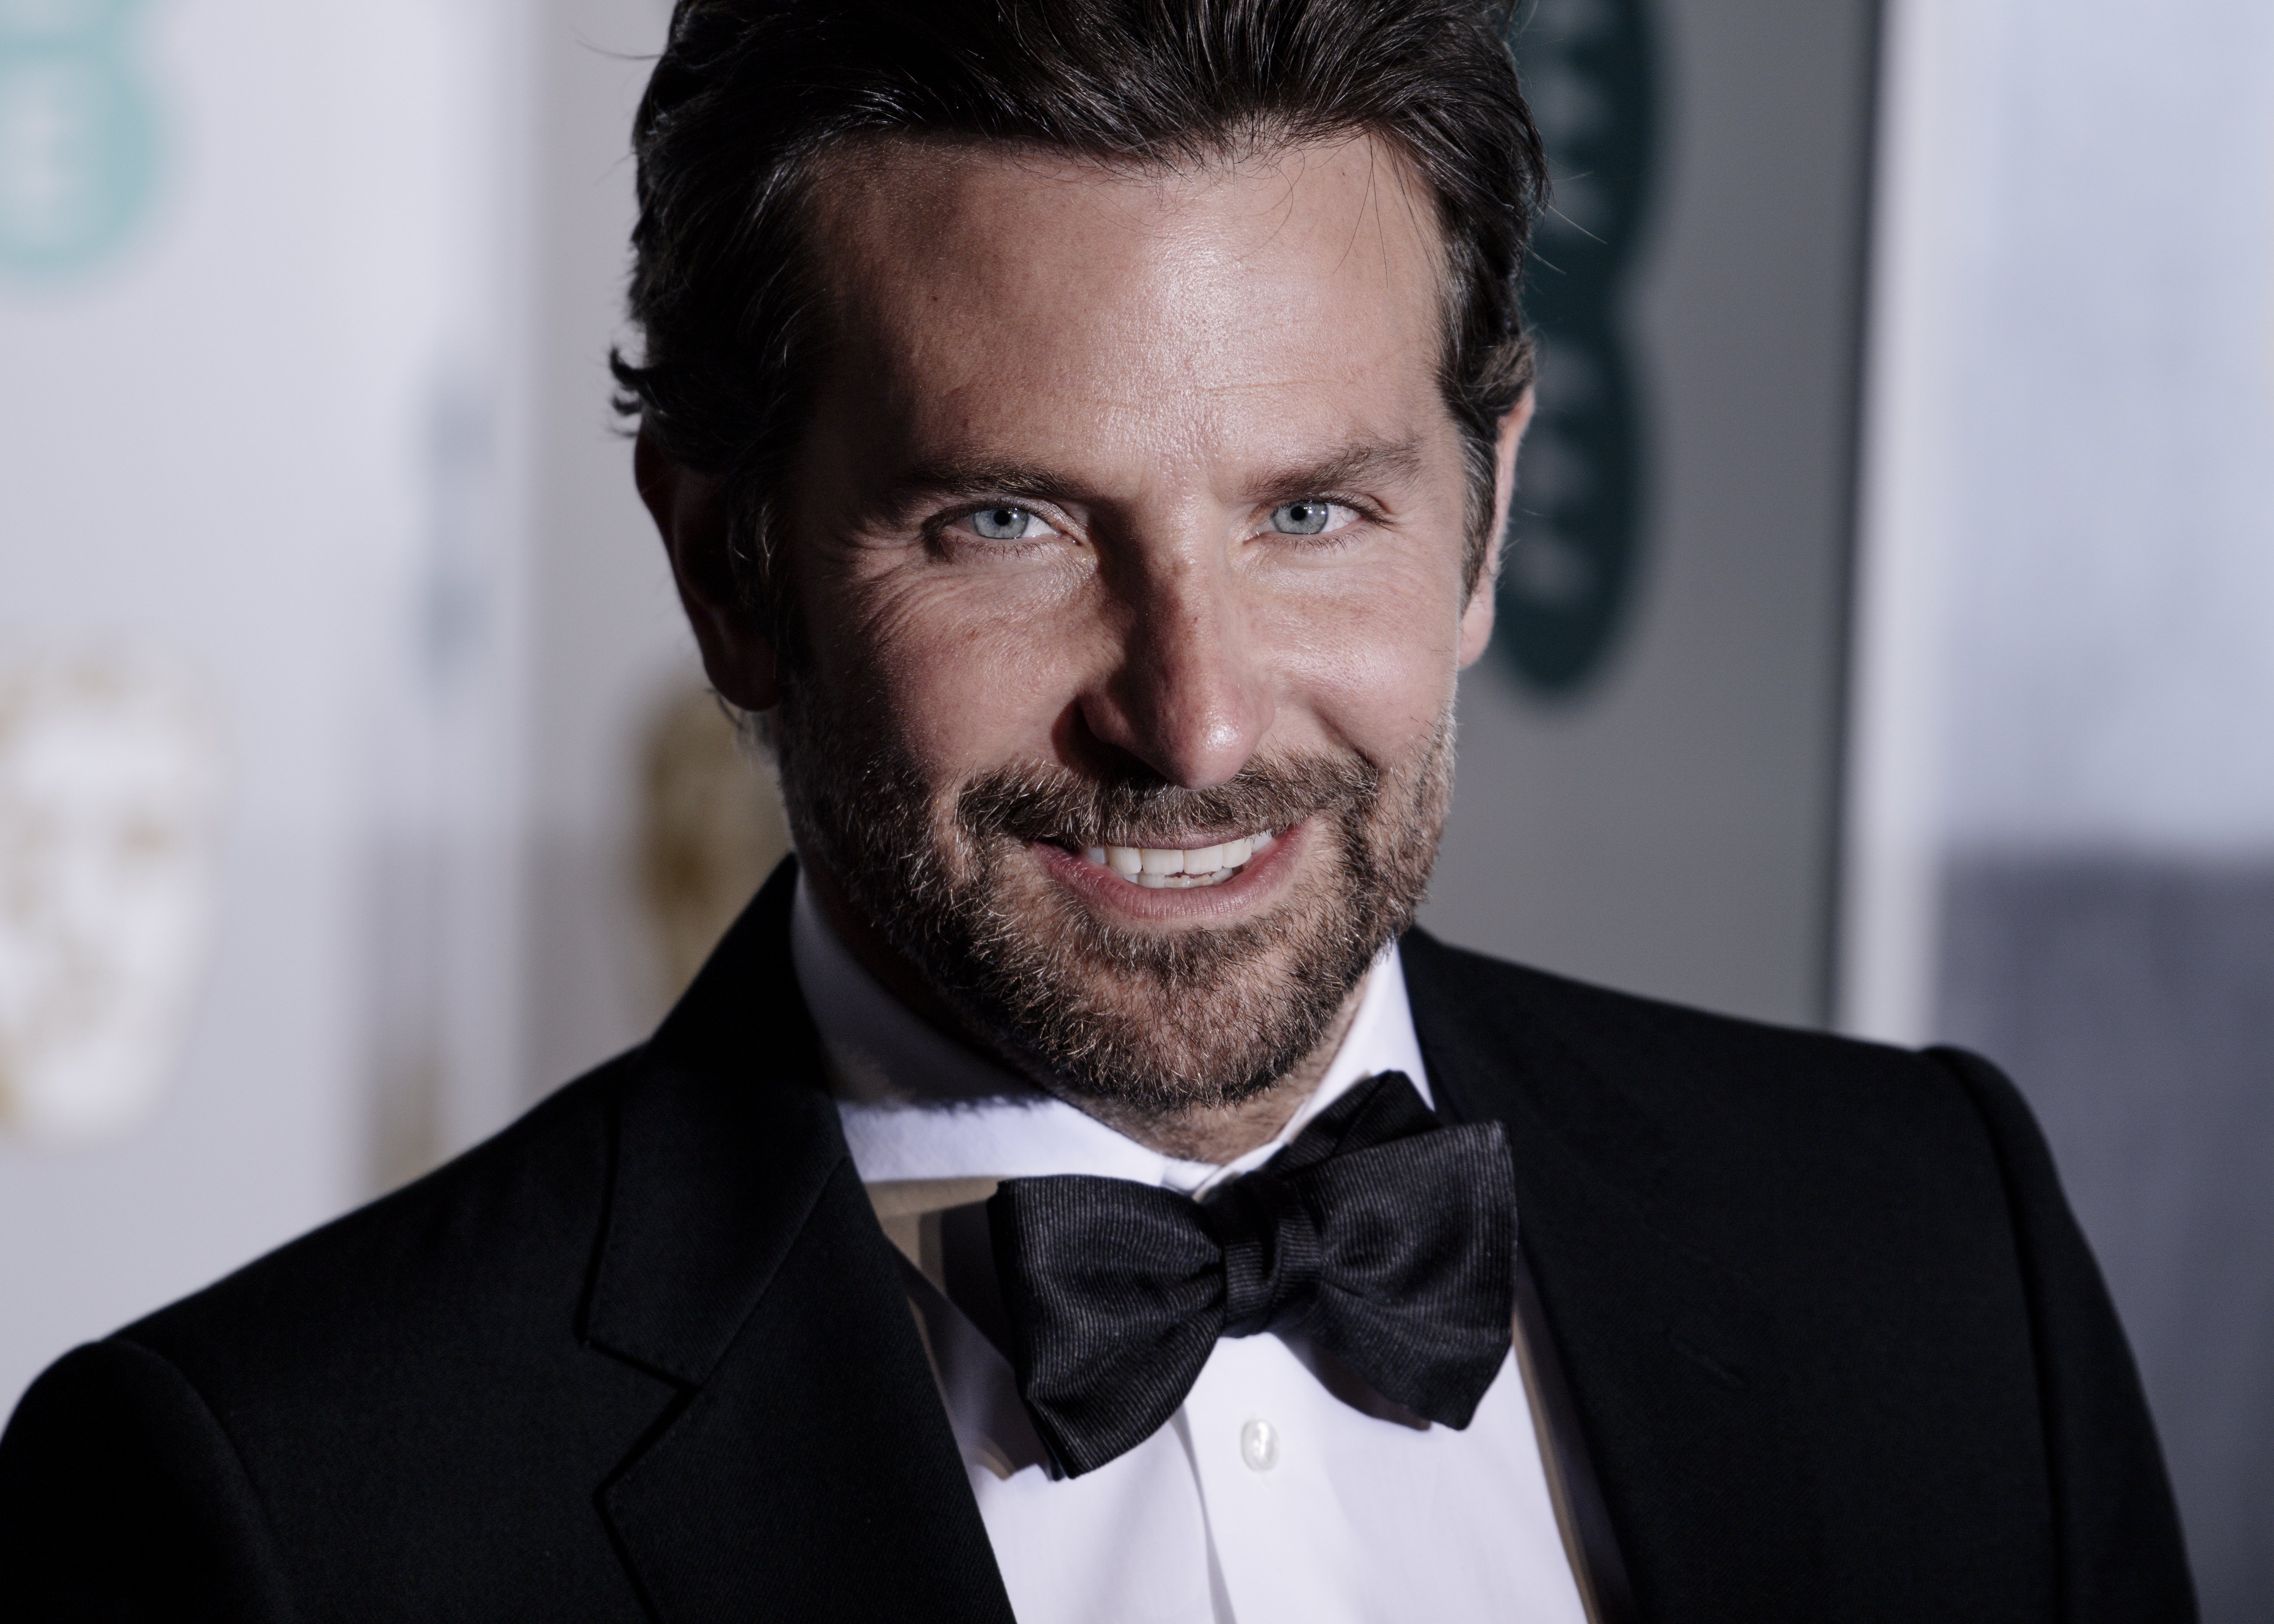 Bradley Cooper attends the EE British Academy Film Awards at Royal Albert Hall on February 10, 2019. | Photo: Getty Images.